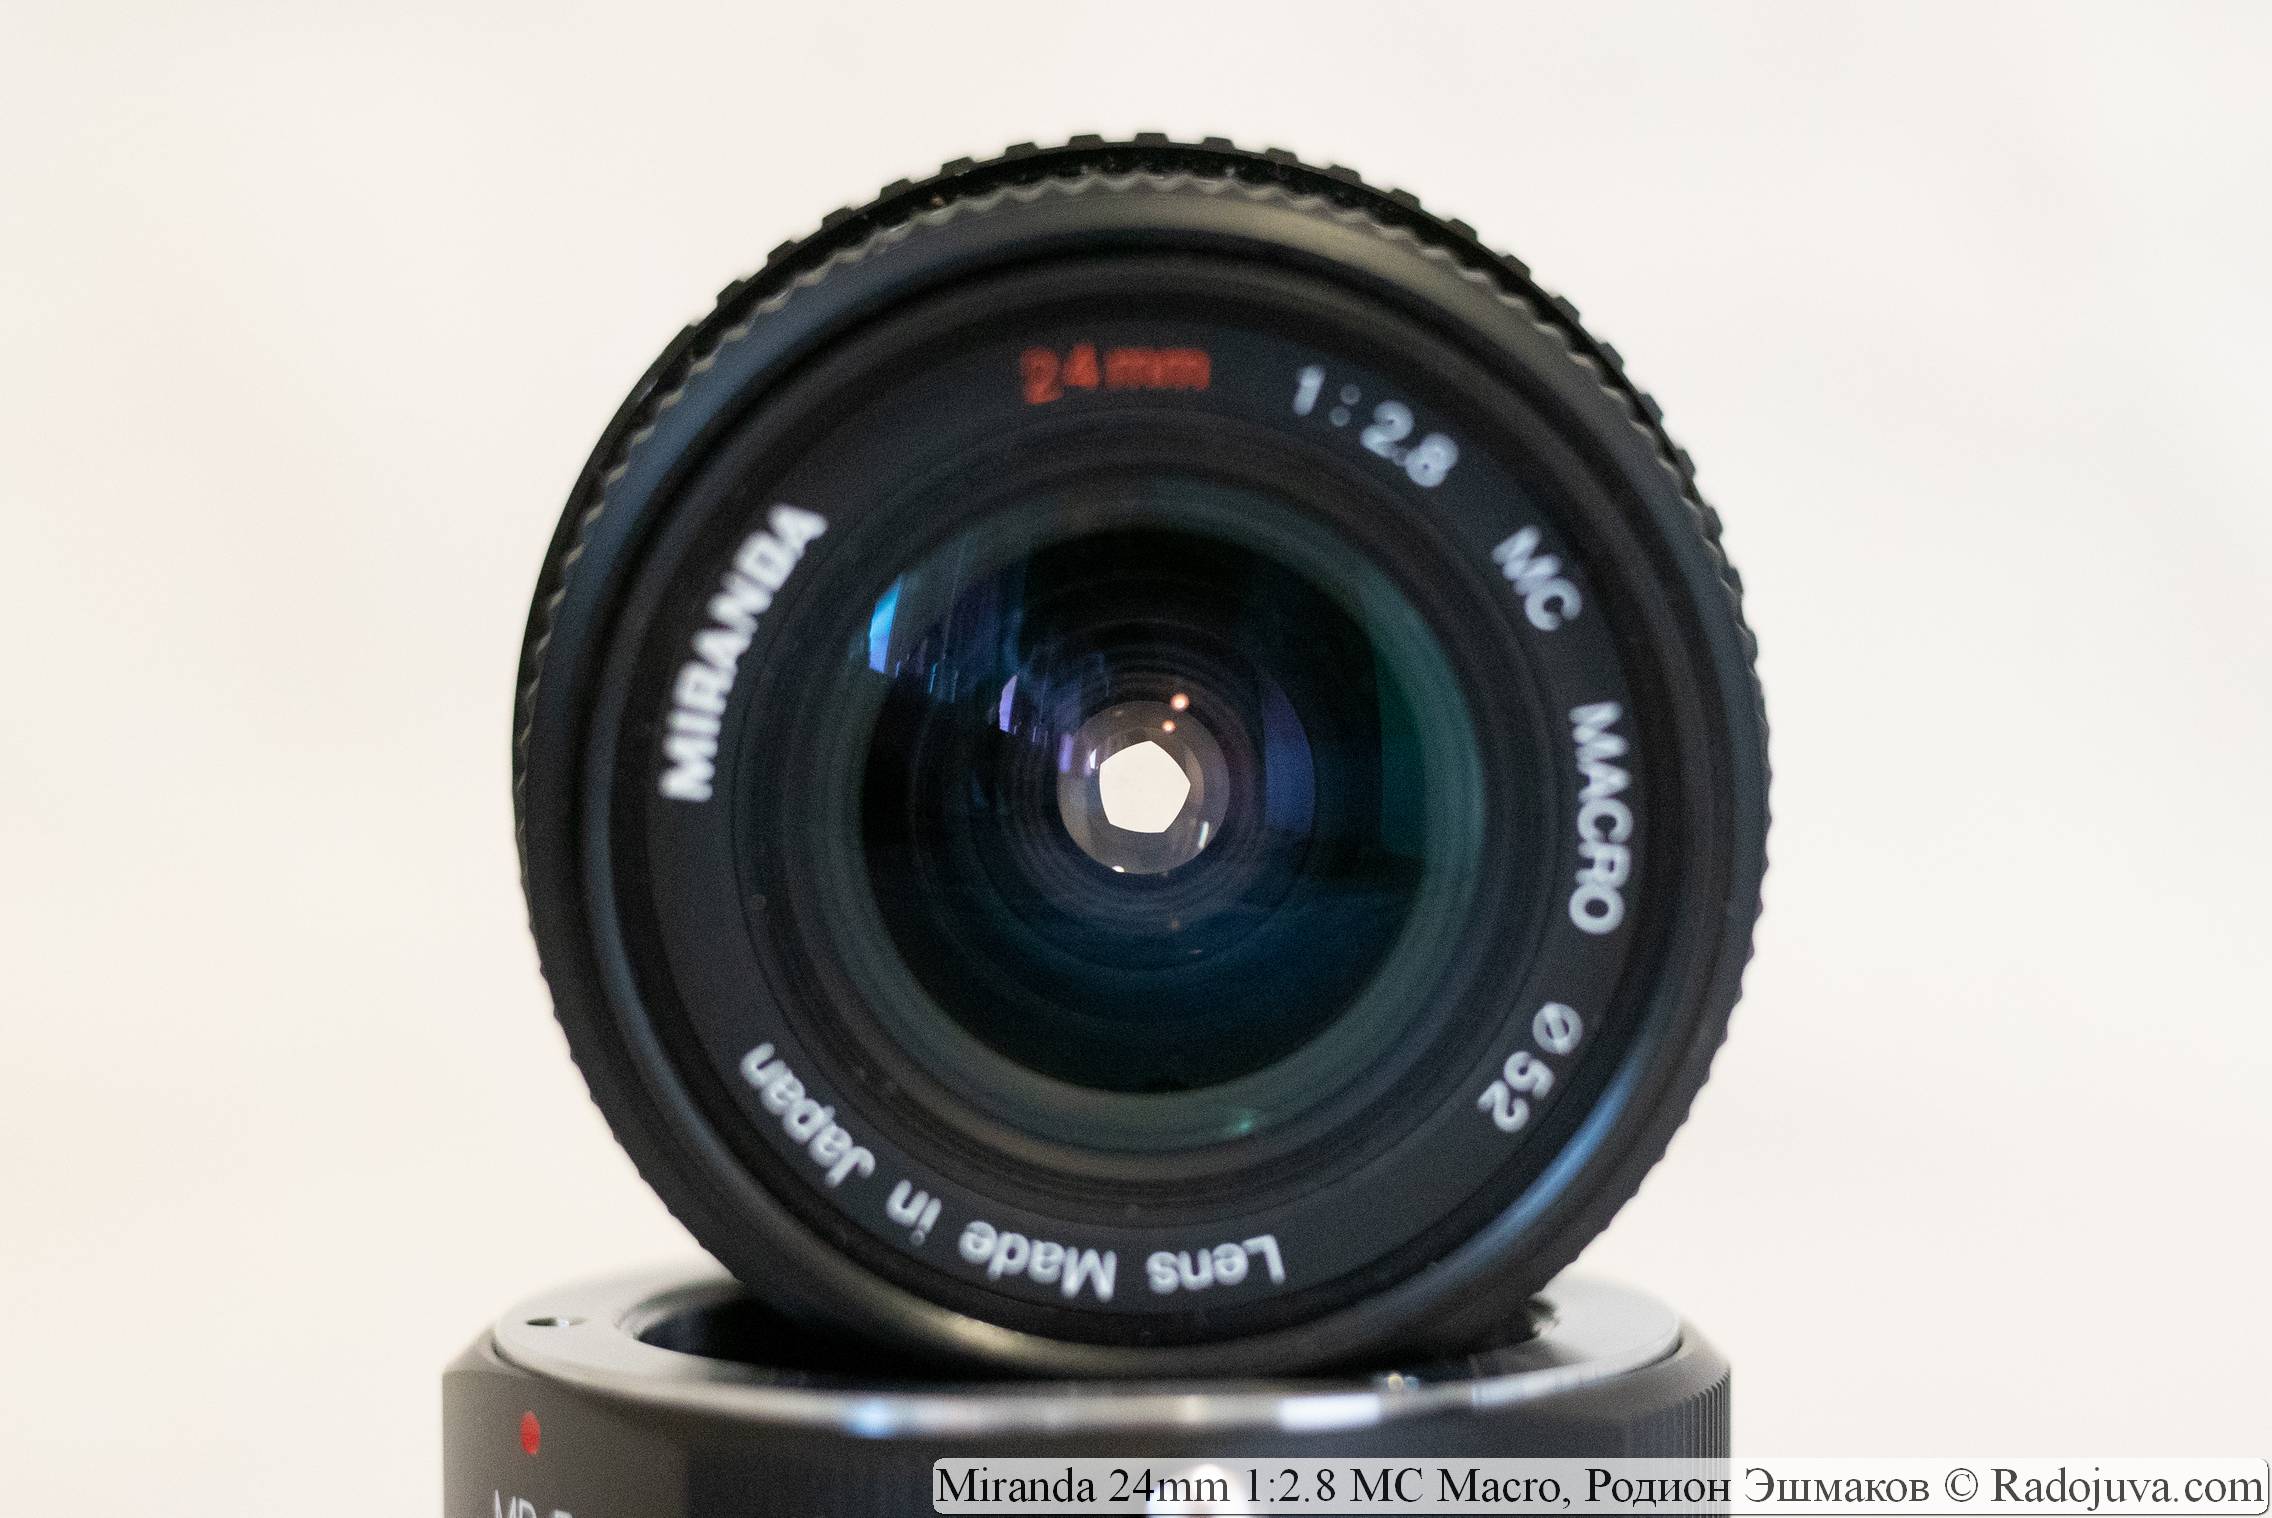 View of the five-blade lens aperture at F / 5.6.